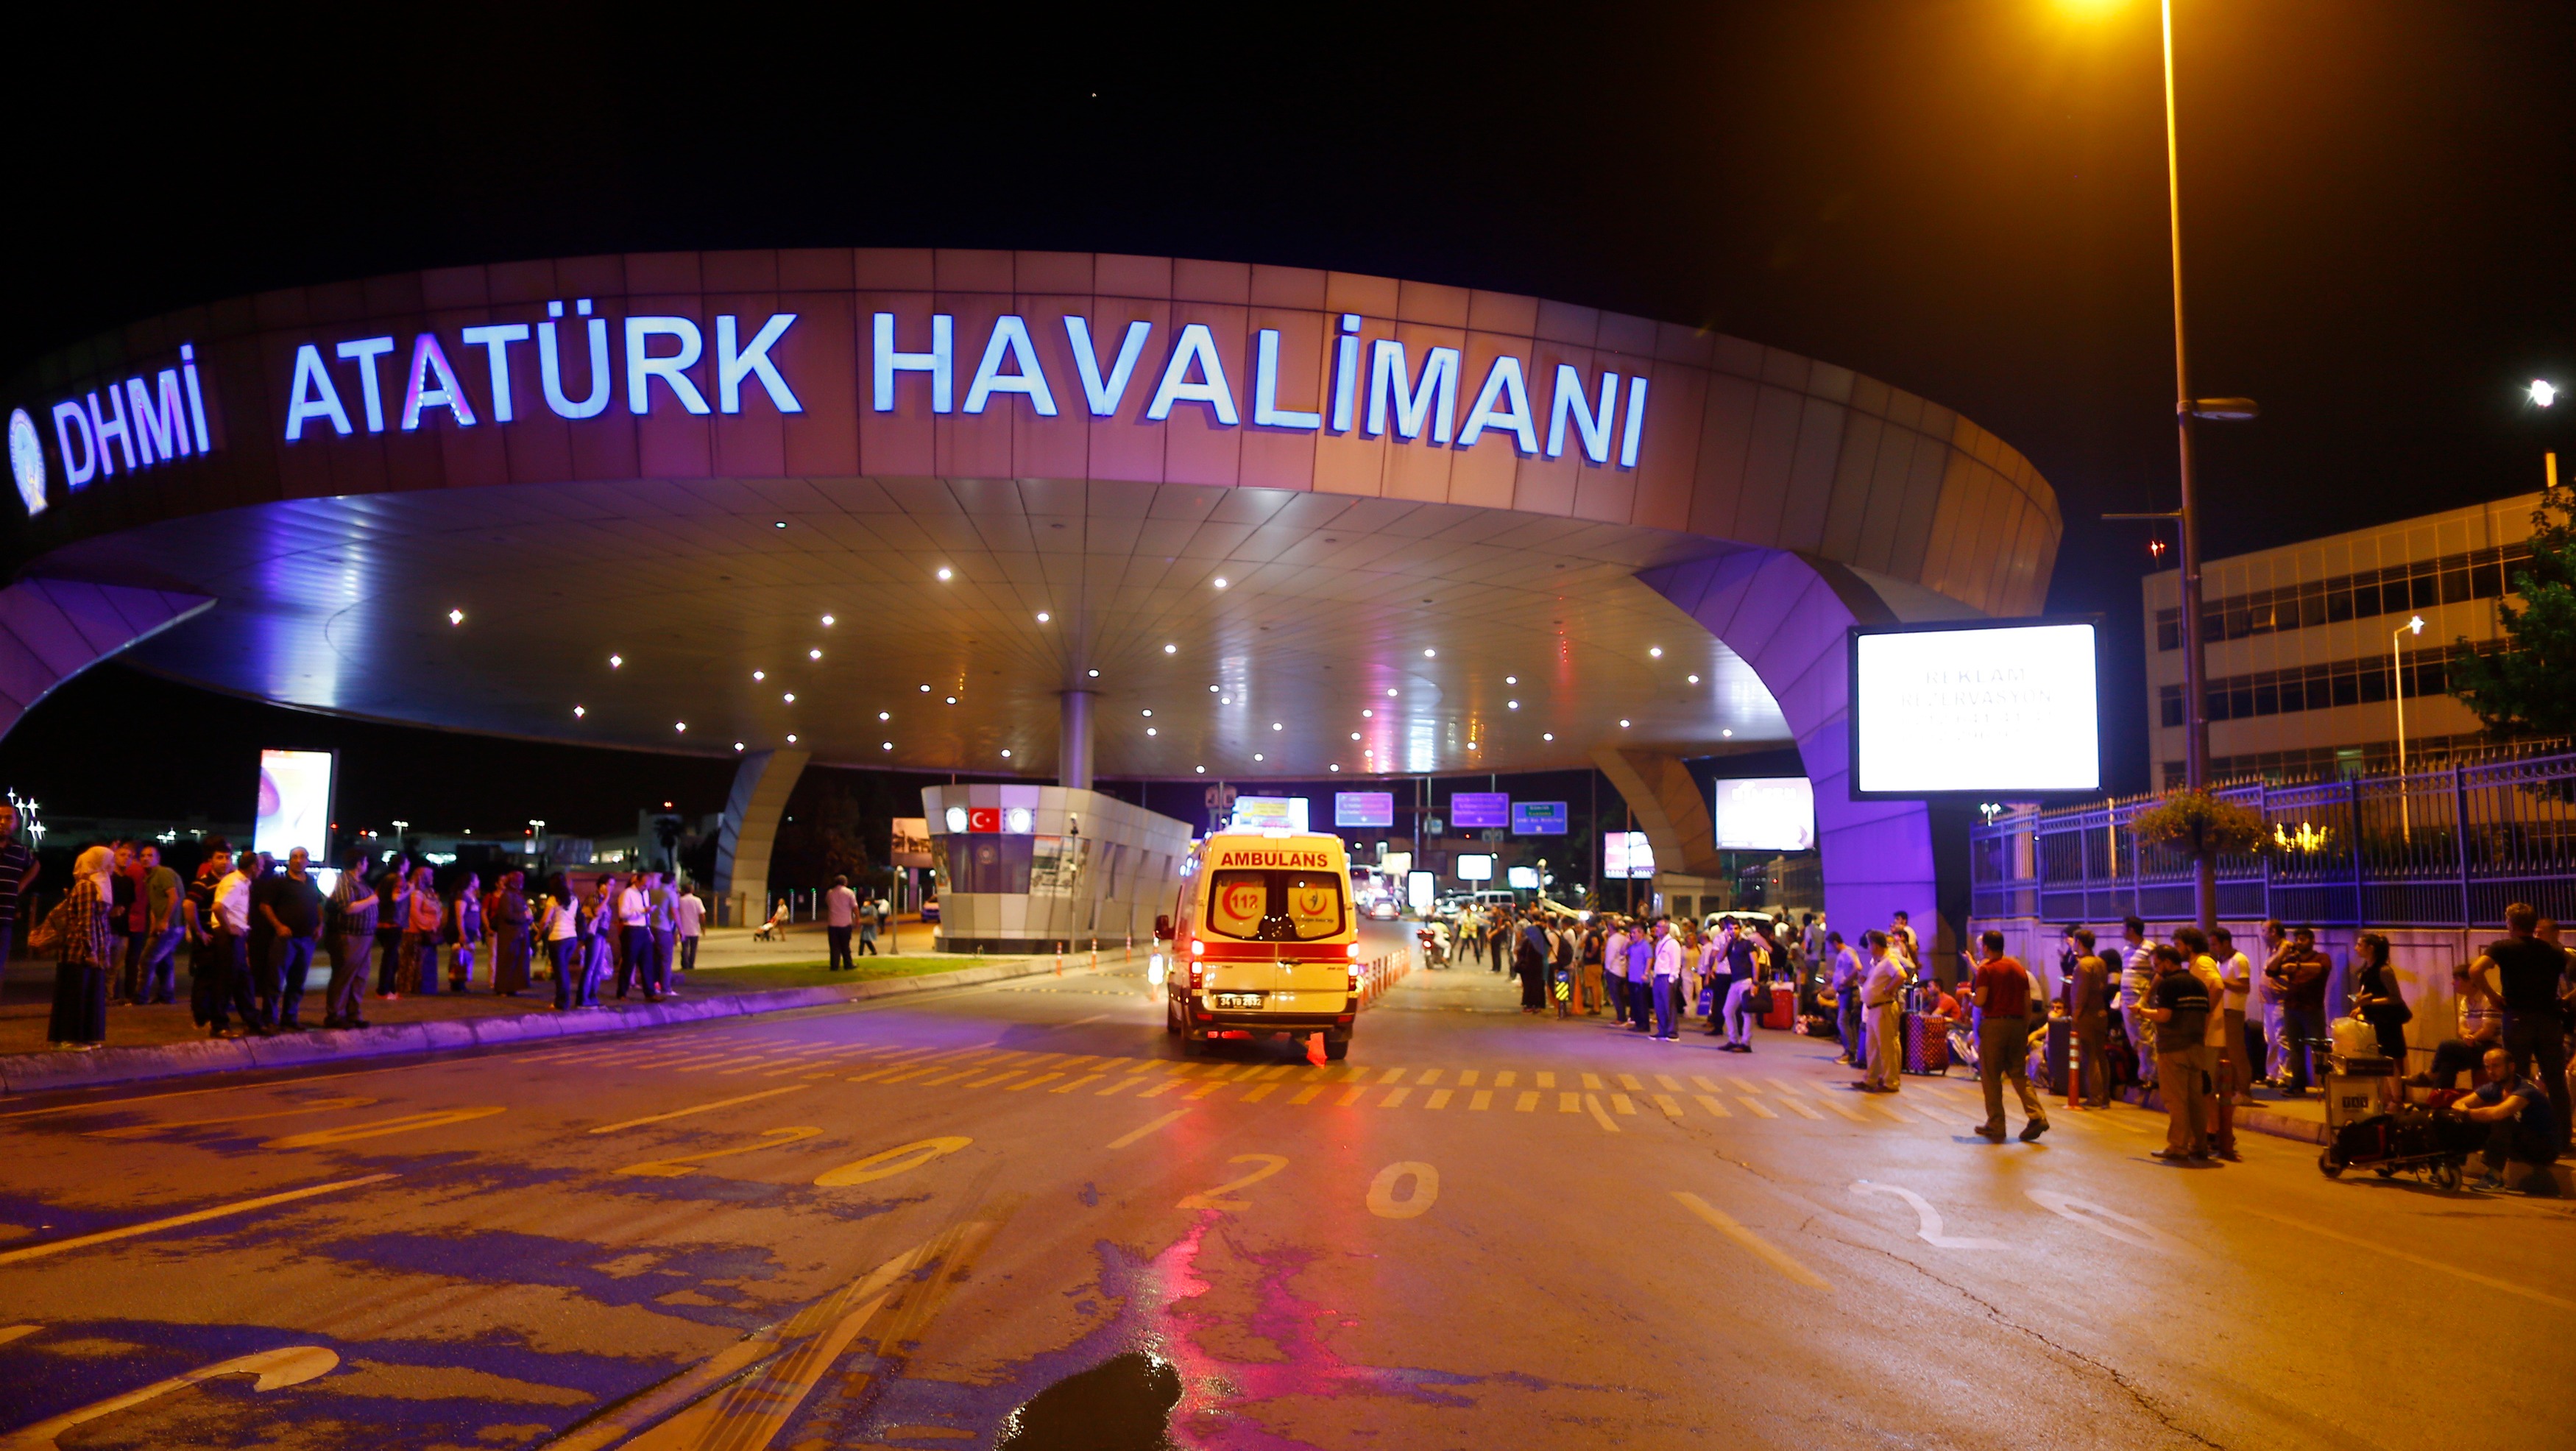 How did the Istanbul airport attackers get past security?